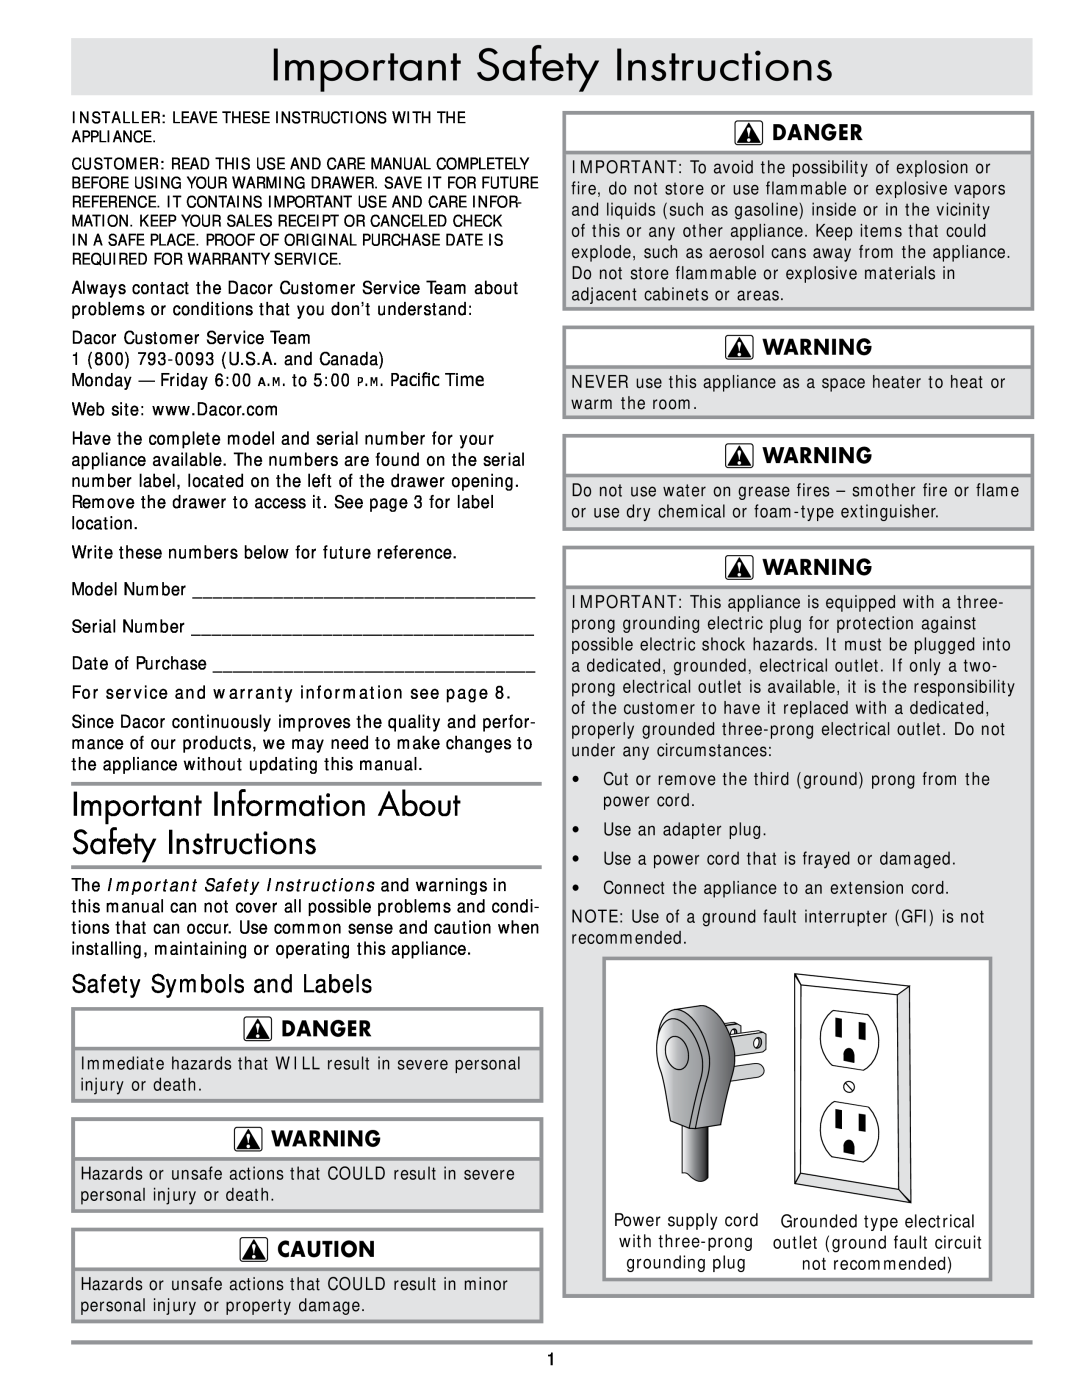 Dacor PWD27, PWD30 important safety instructions Important Safety Instructions, Safety Symbols and Labels, danger 